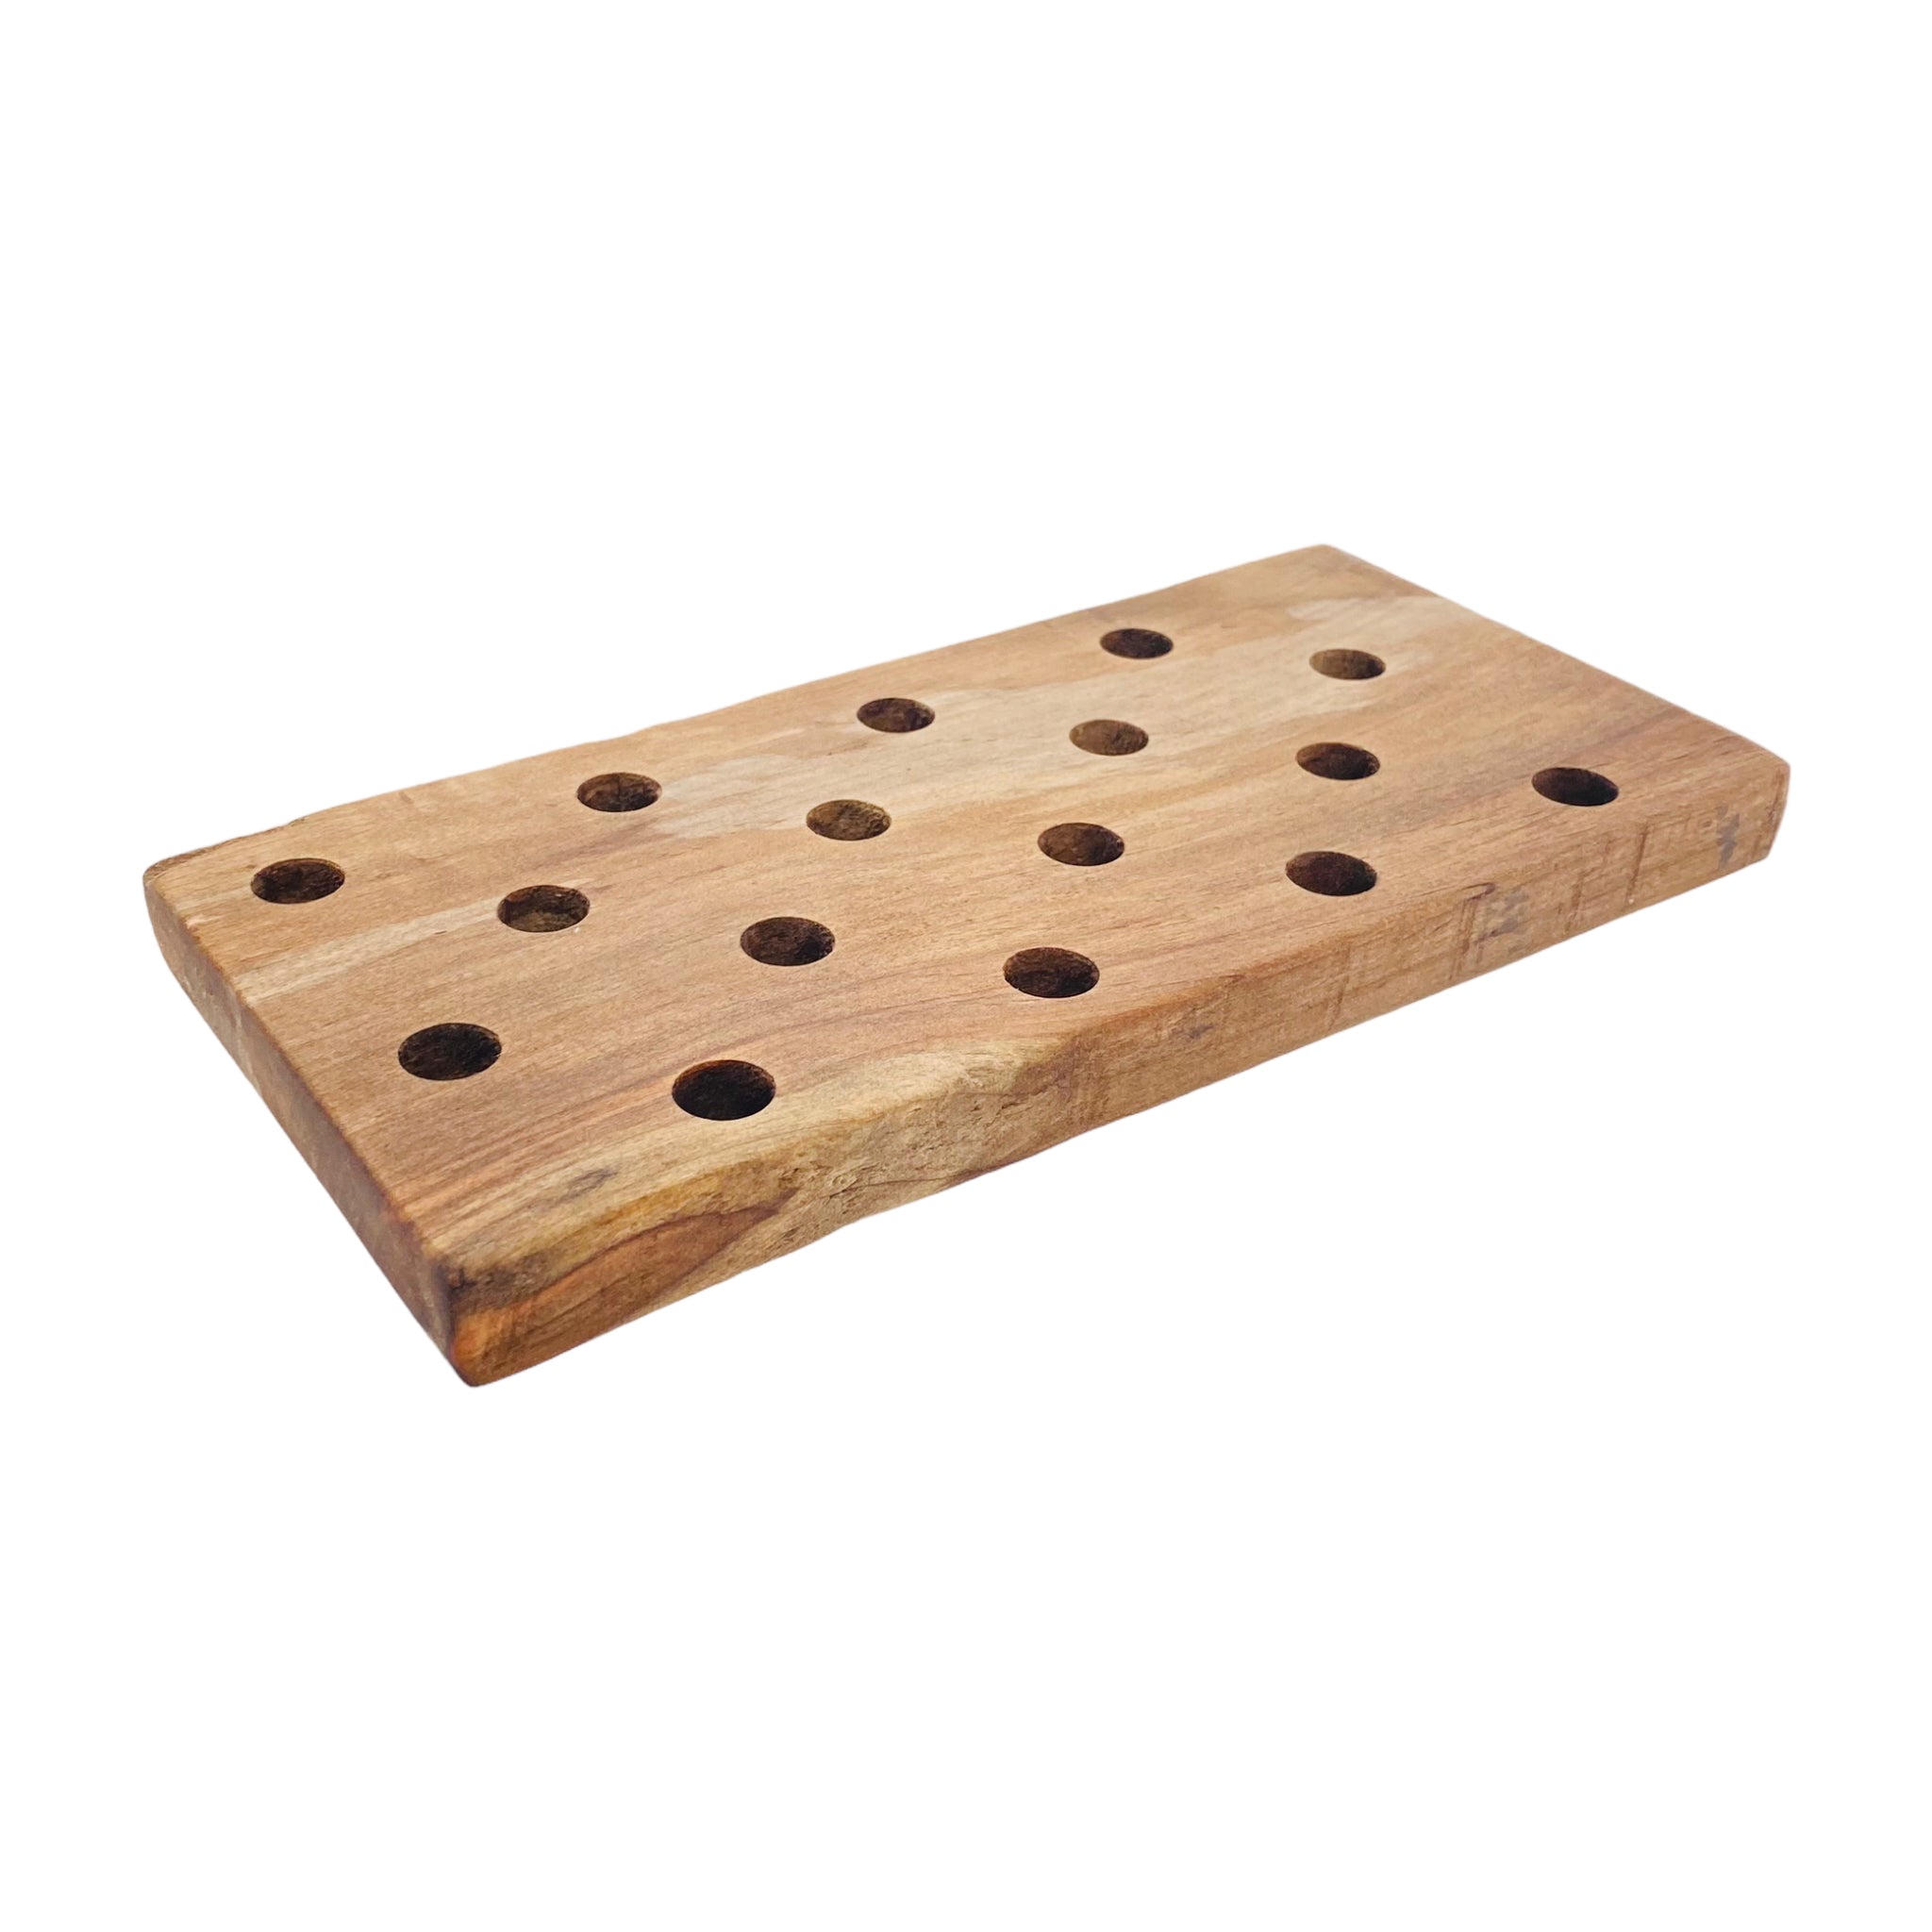 16 Hole Wood Display Stand Holder For 14mm Bong Bowl Pieces Or Quartz Bangers - Drift Wood